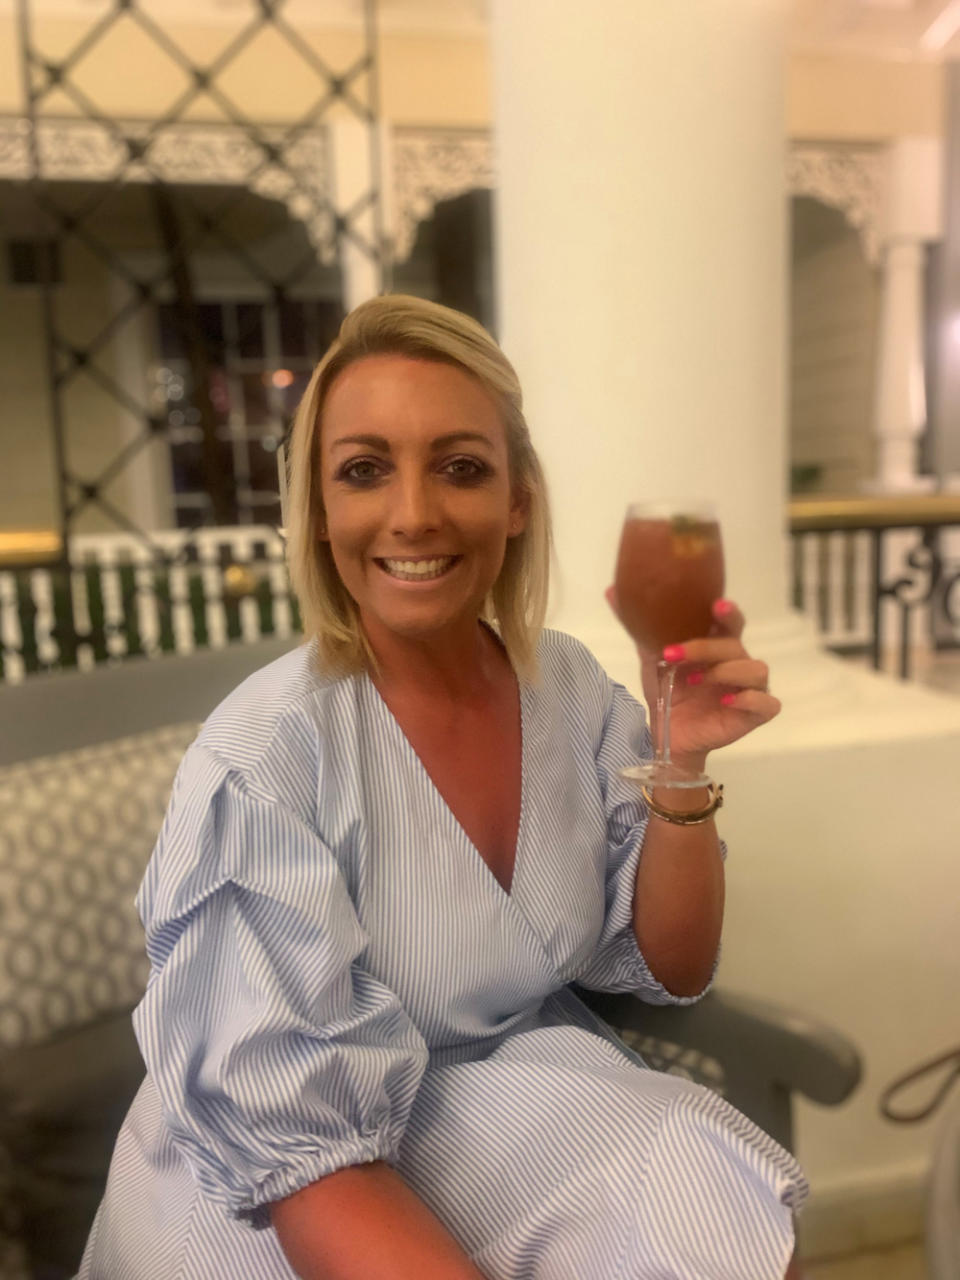 Keeley Lengthorn on holiday in the Dominican Republic in September 2019 (Collect/PA Real Life)